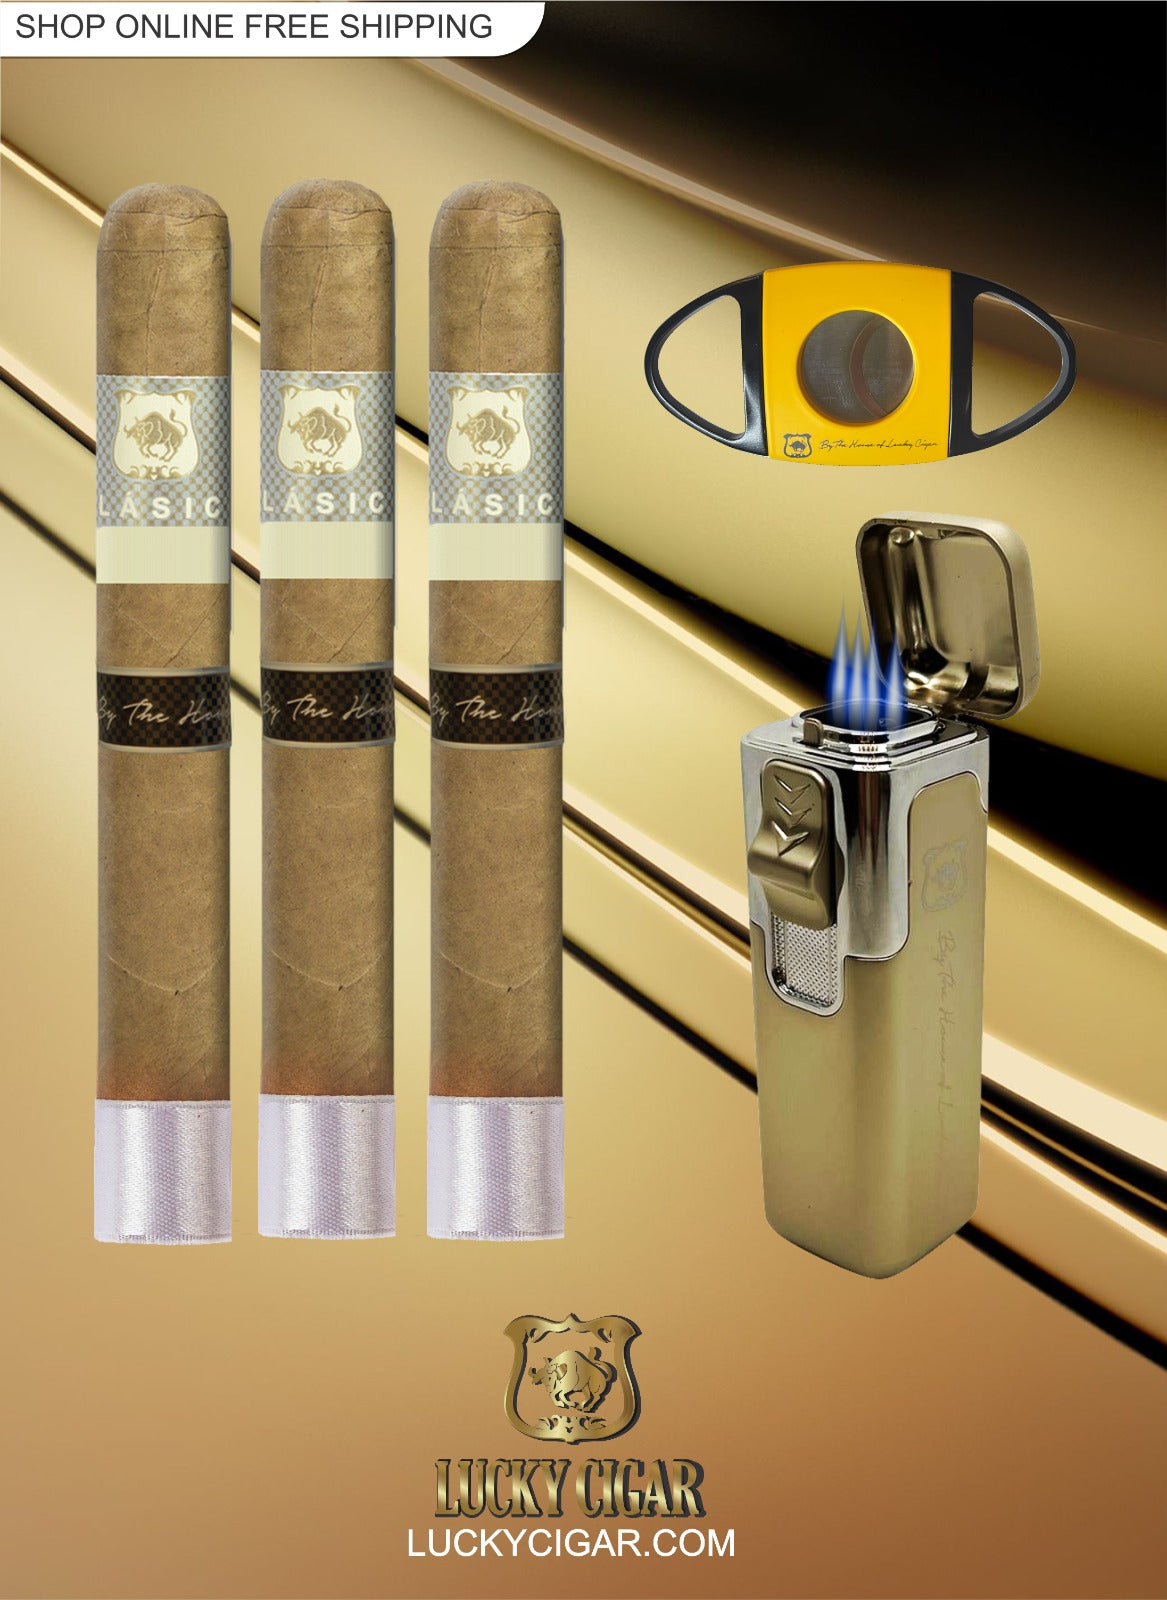 Lucky Cigar Sampler Sets: Set of 3 Classico Robusto Cigars with Torch, Cutter